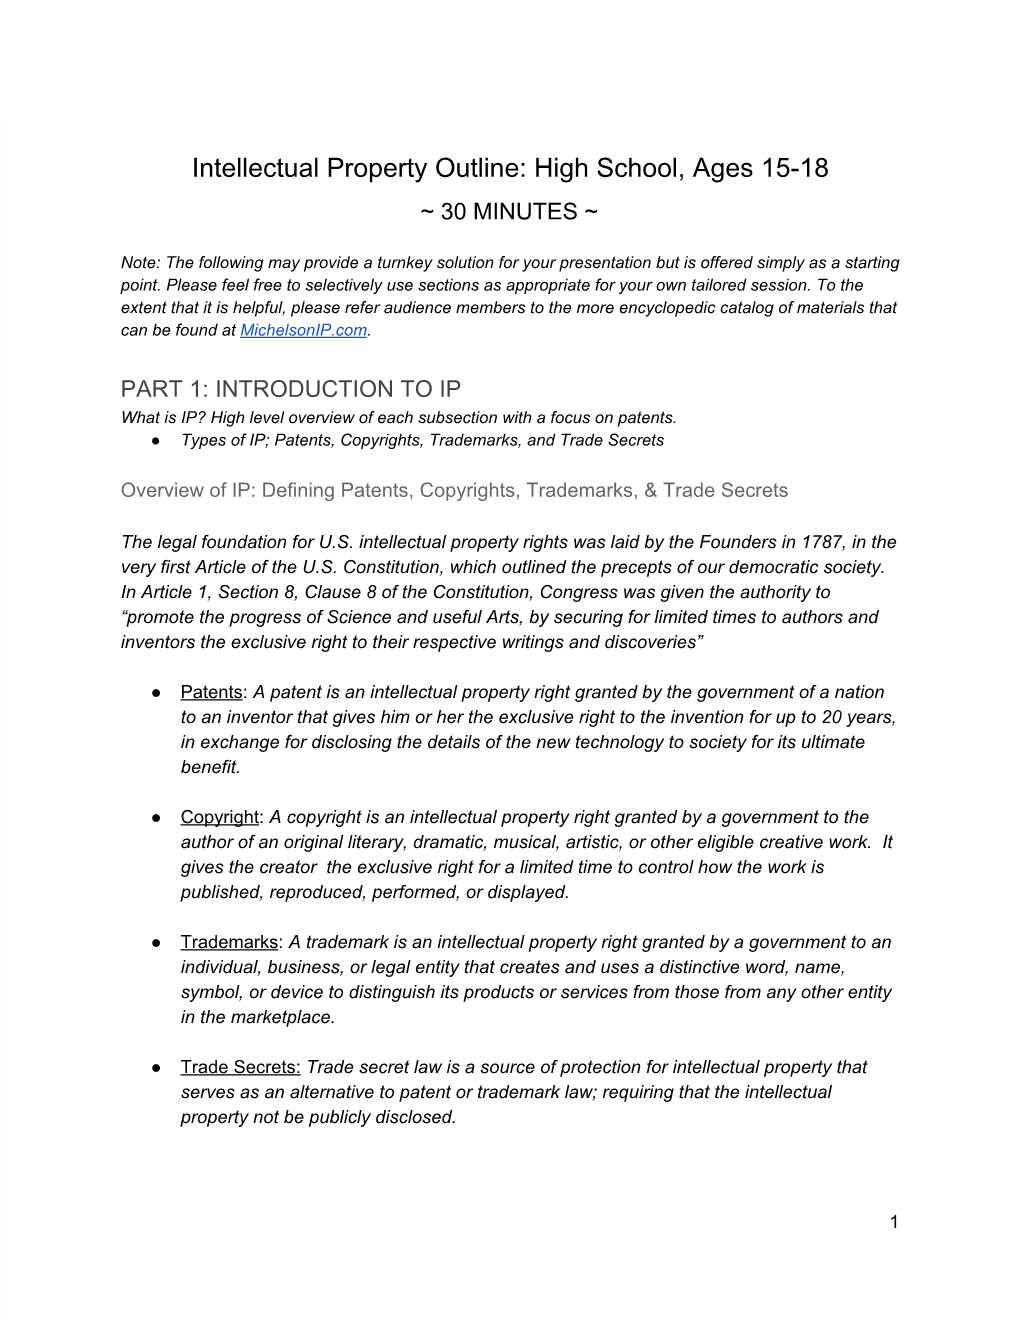 Intellectual Property Outline: High School, Ages 15-18